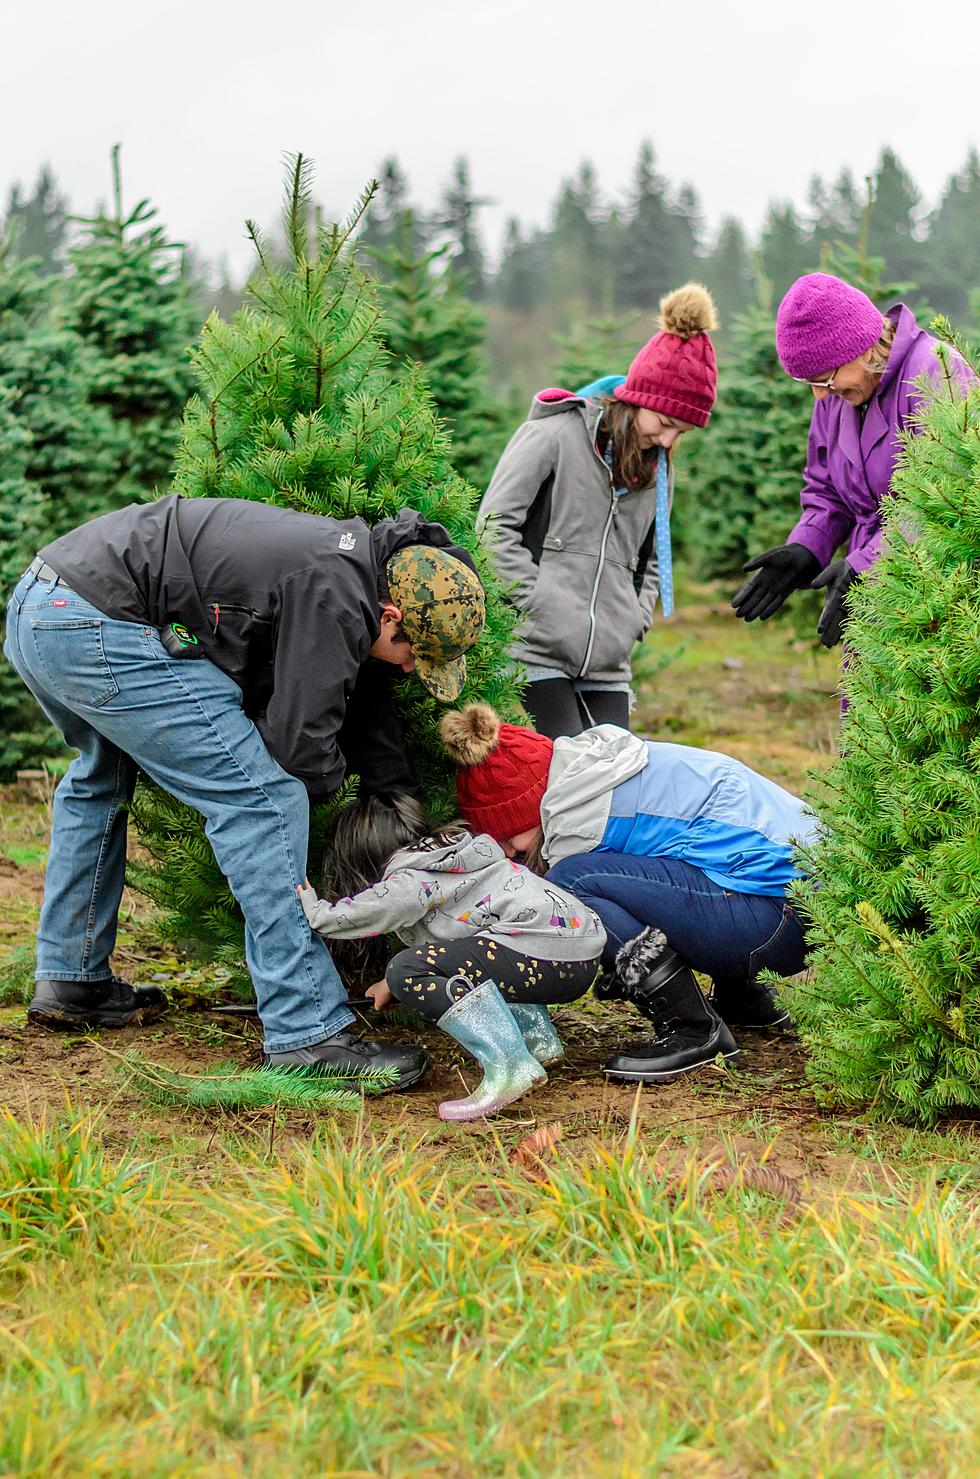 Are Christmas Trees Hard To Find This Year? No & Yes